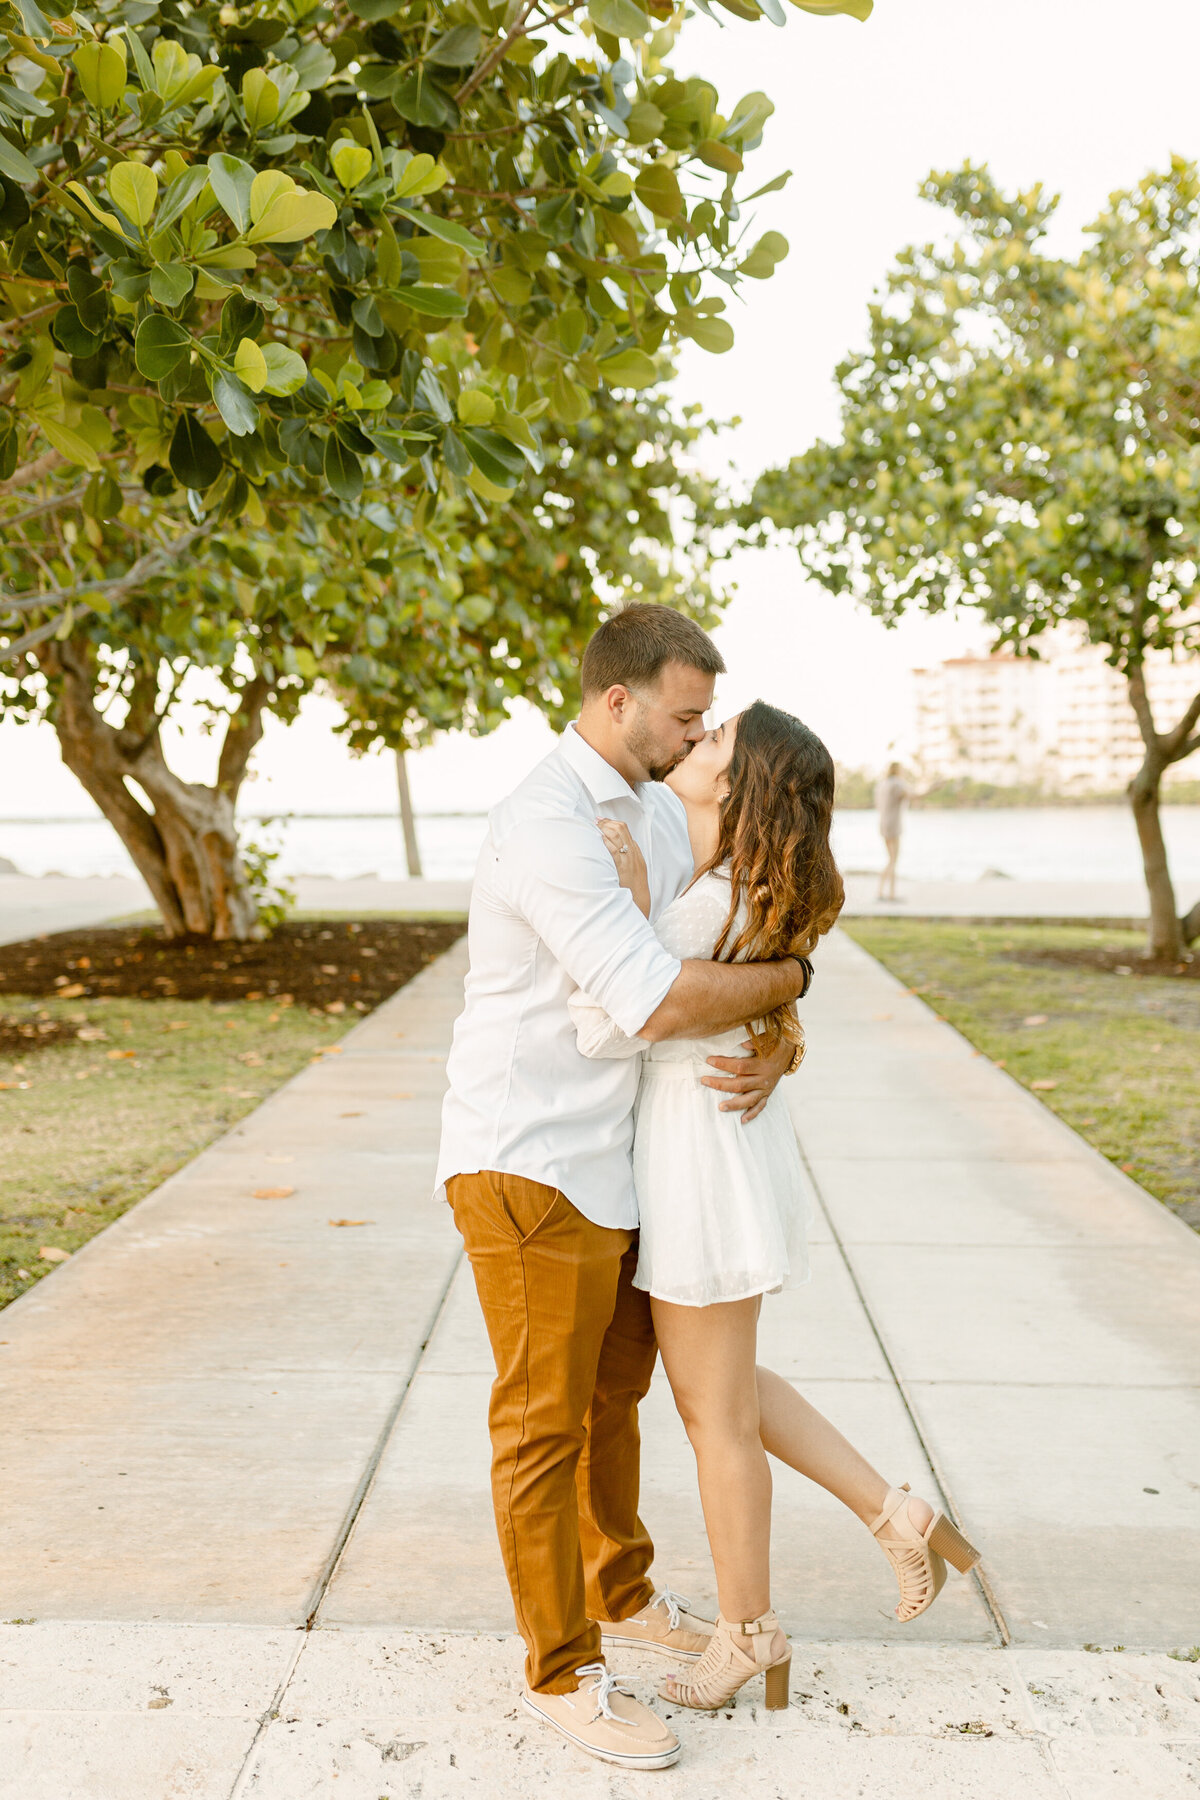 South Pointe Park Engagement Photography Session 12